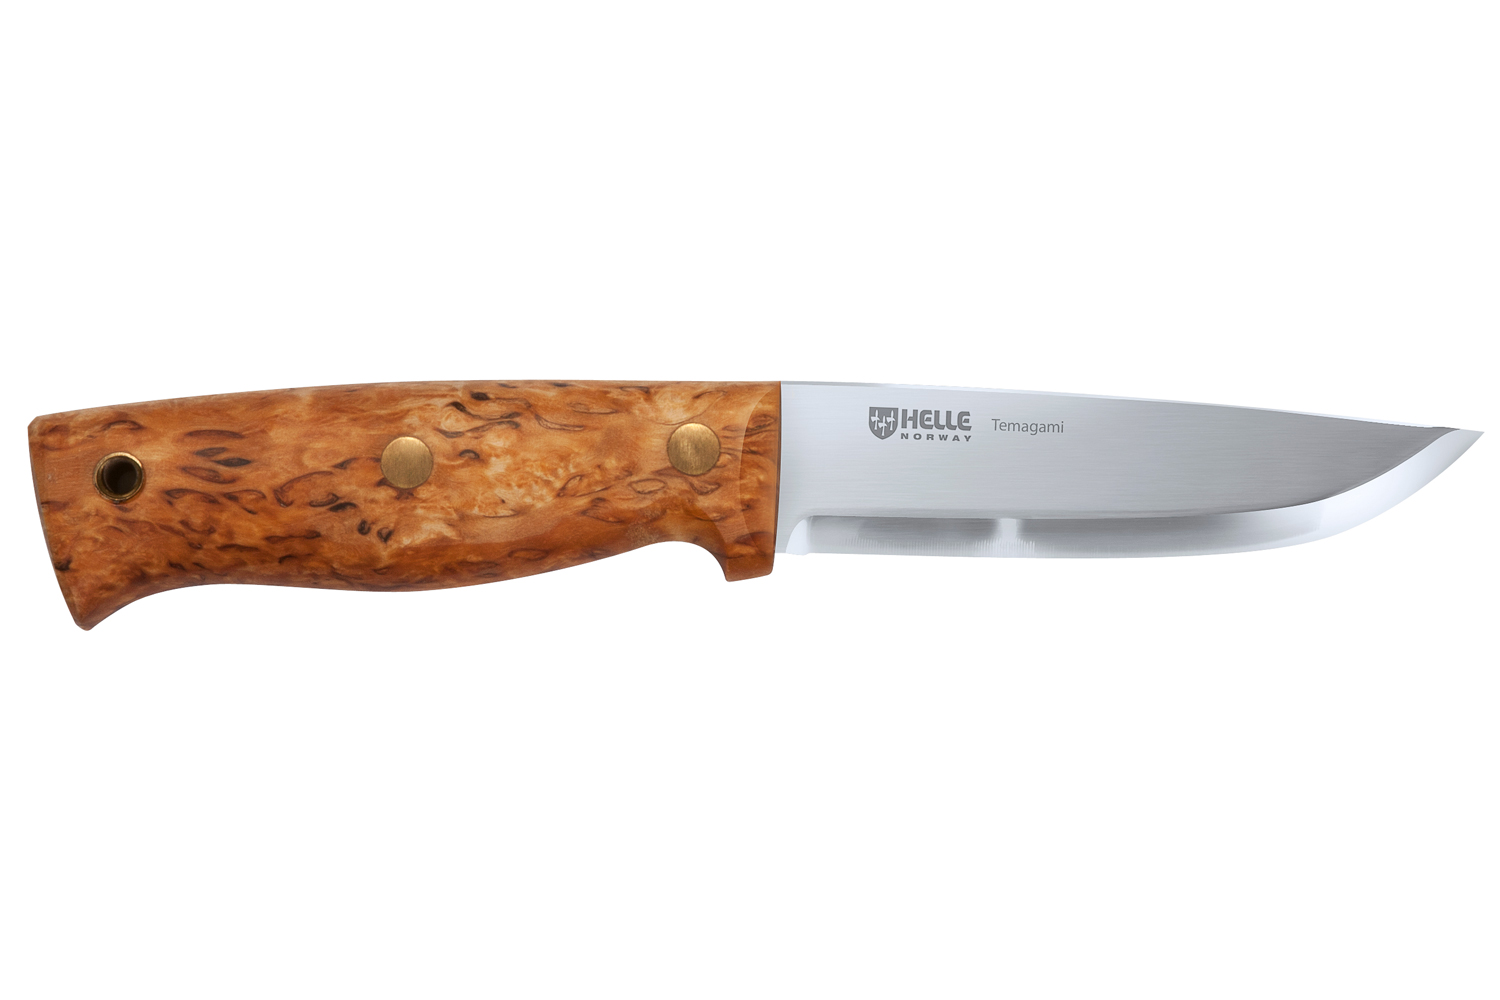 Helle Eggen Knife (Review & Buying Guide) 2021 - Task & Purpose